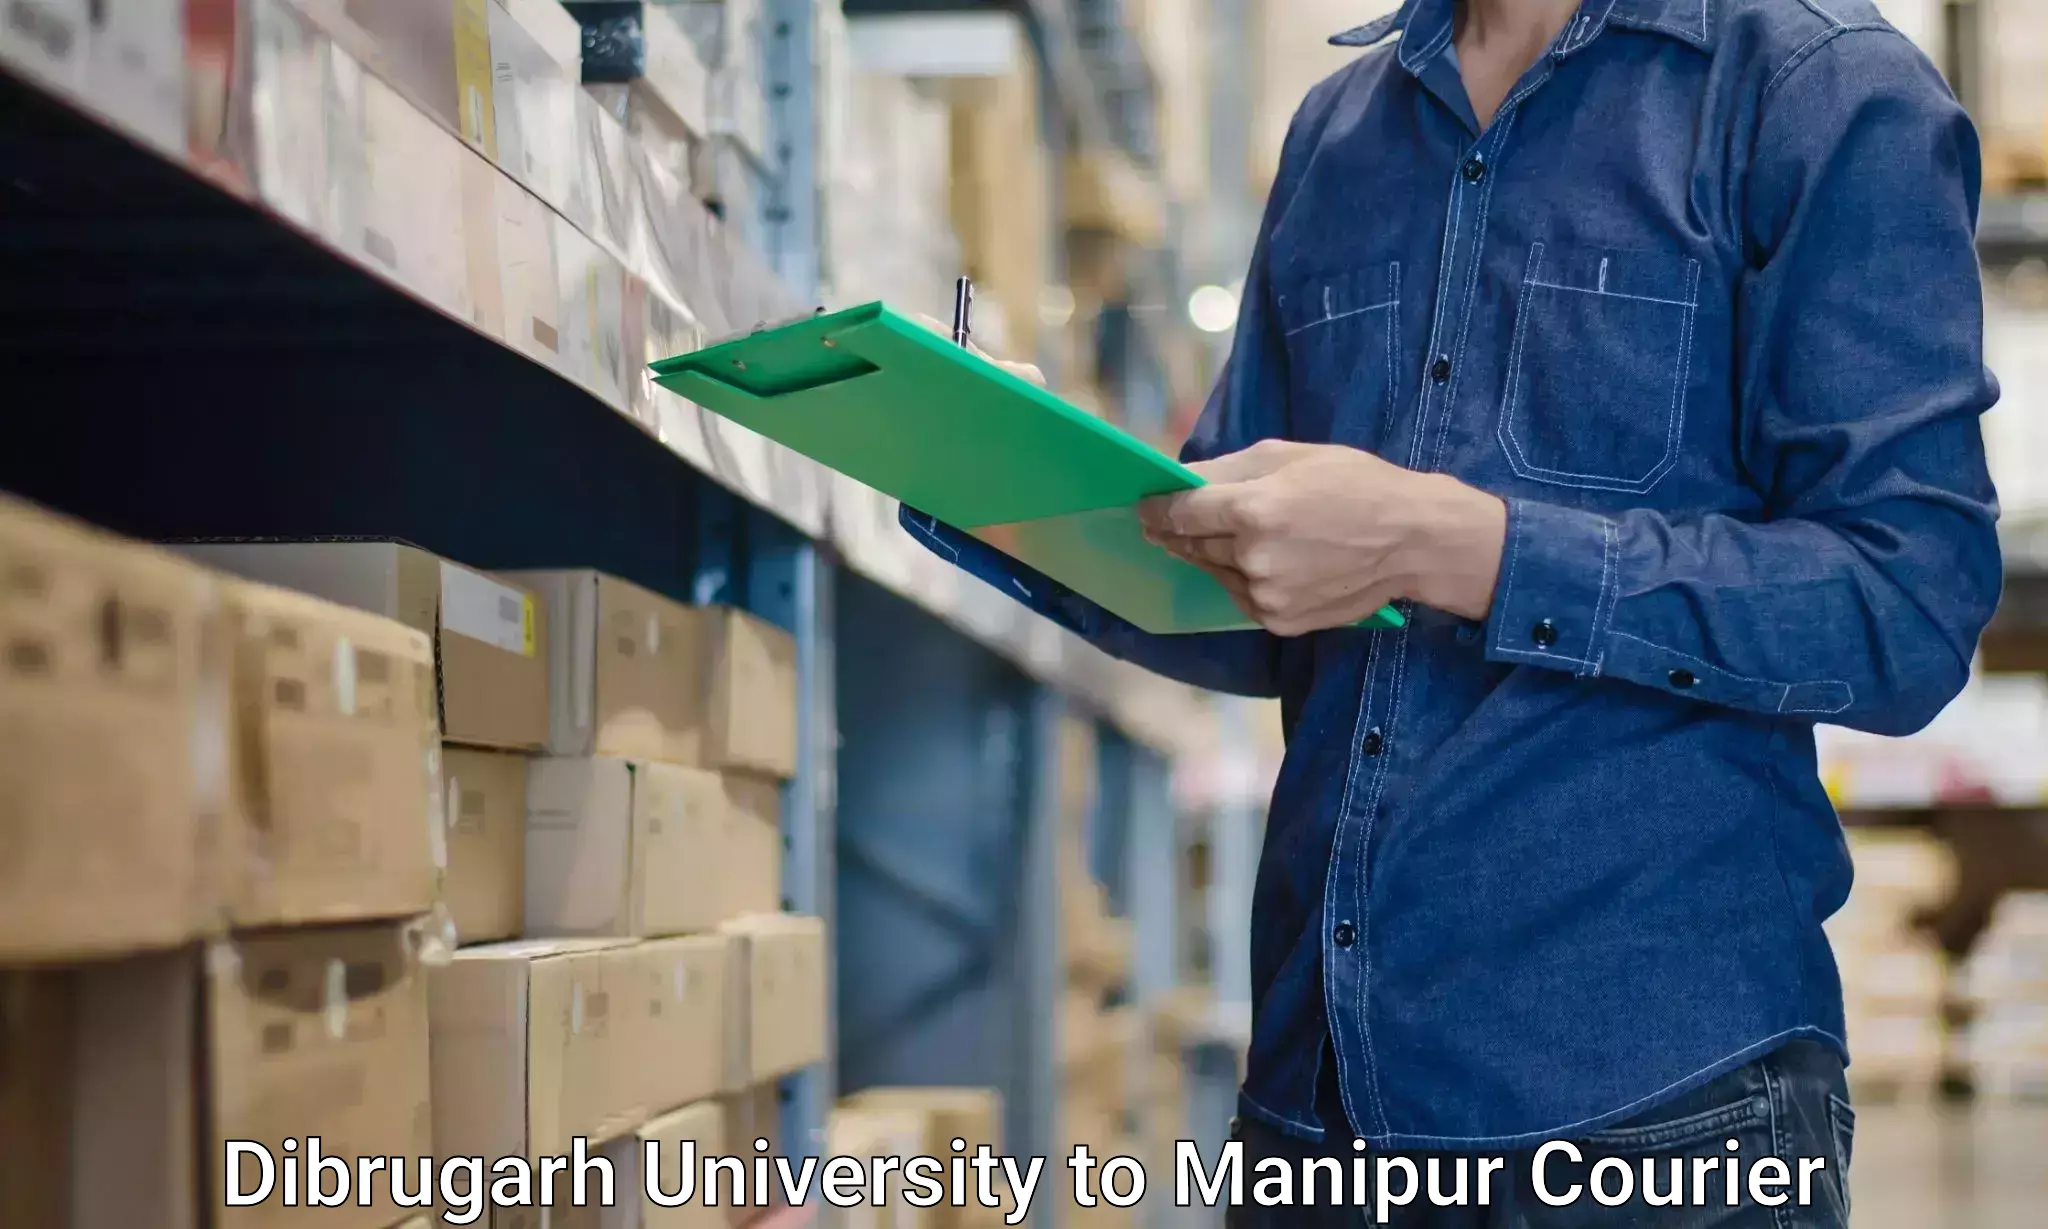 Professional movers and packers Dibrugarh University to Tadubi